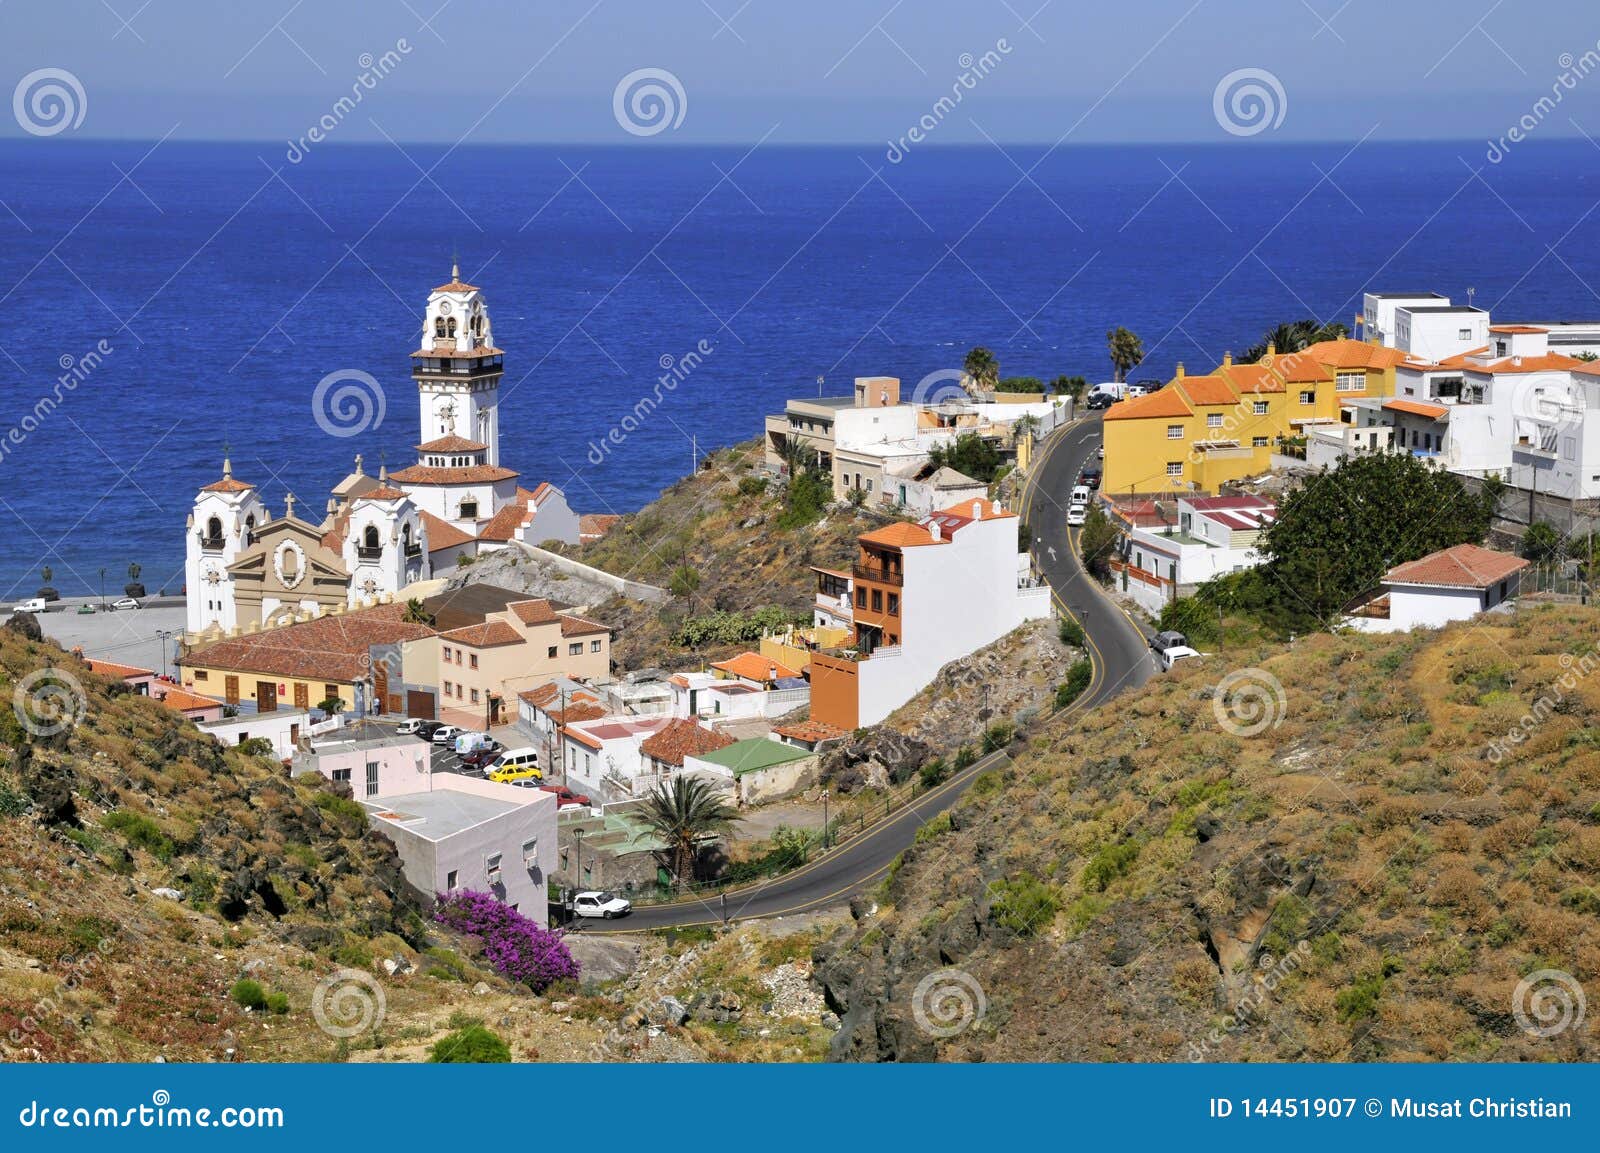 town of candelaria at tenerife